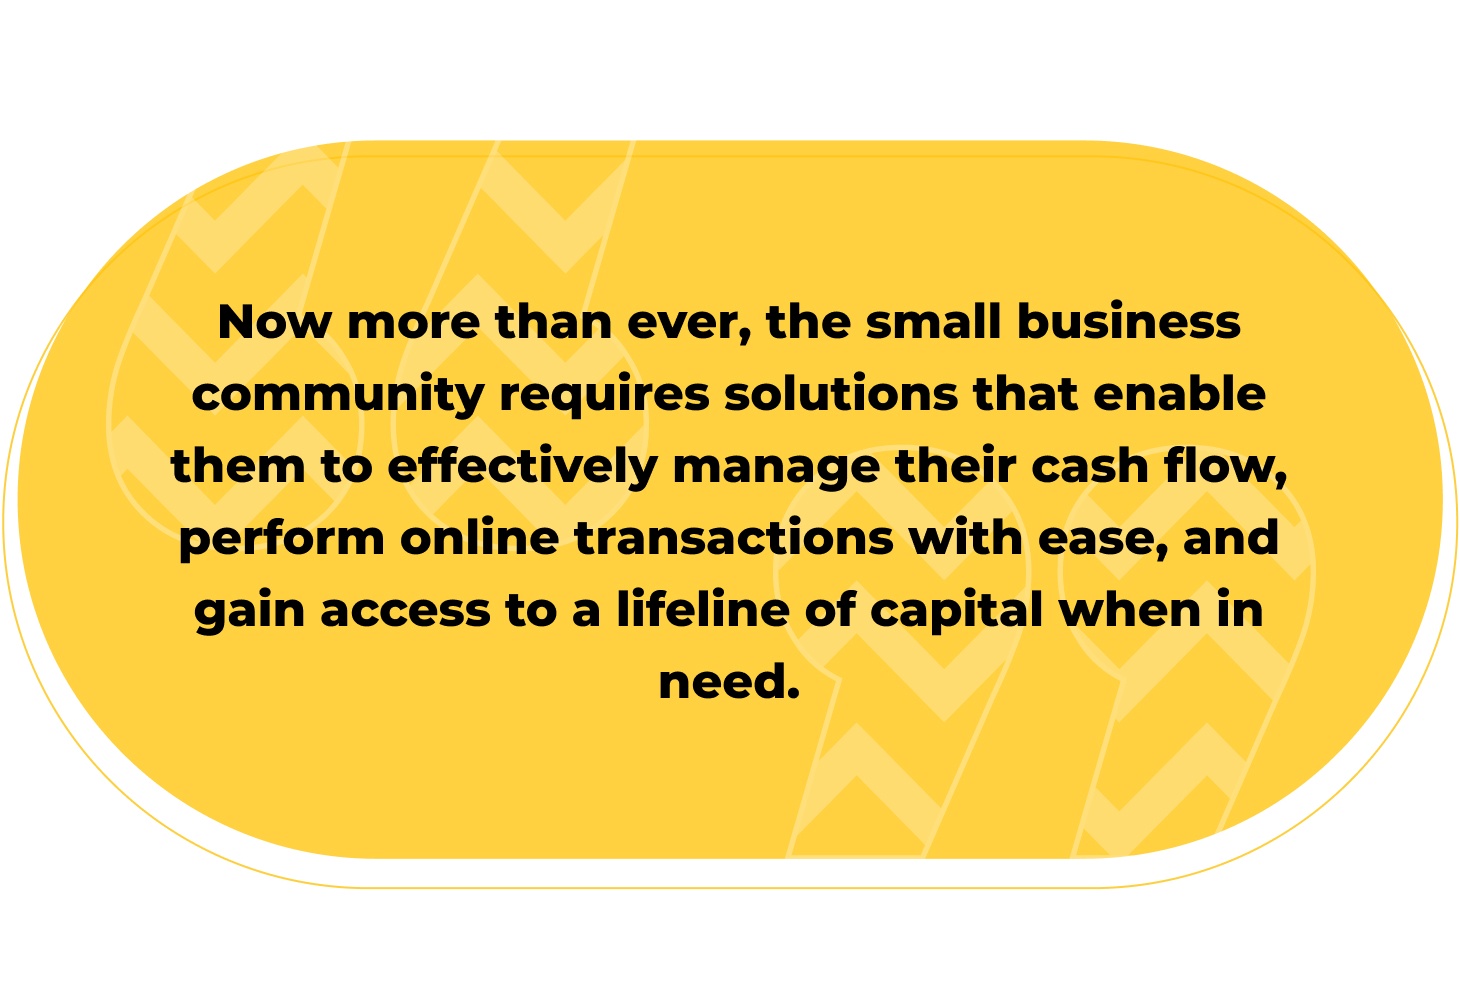 Cash flow for SMBs